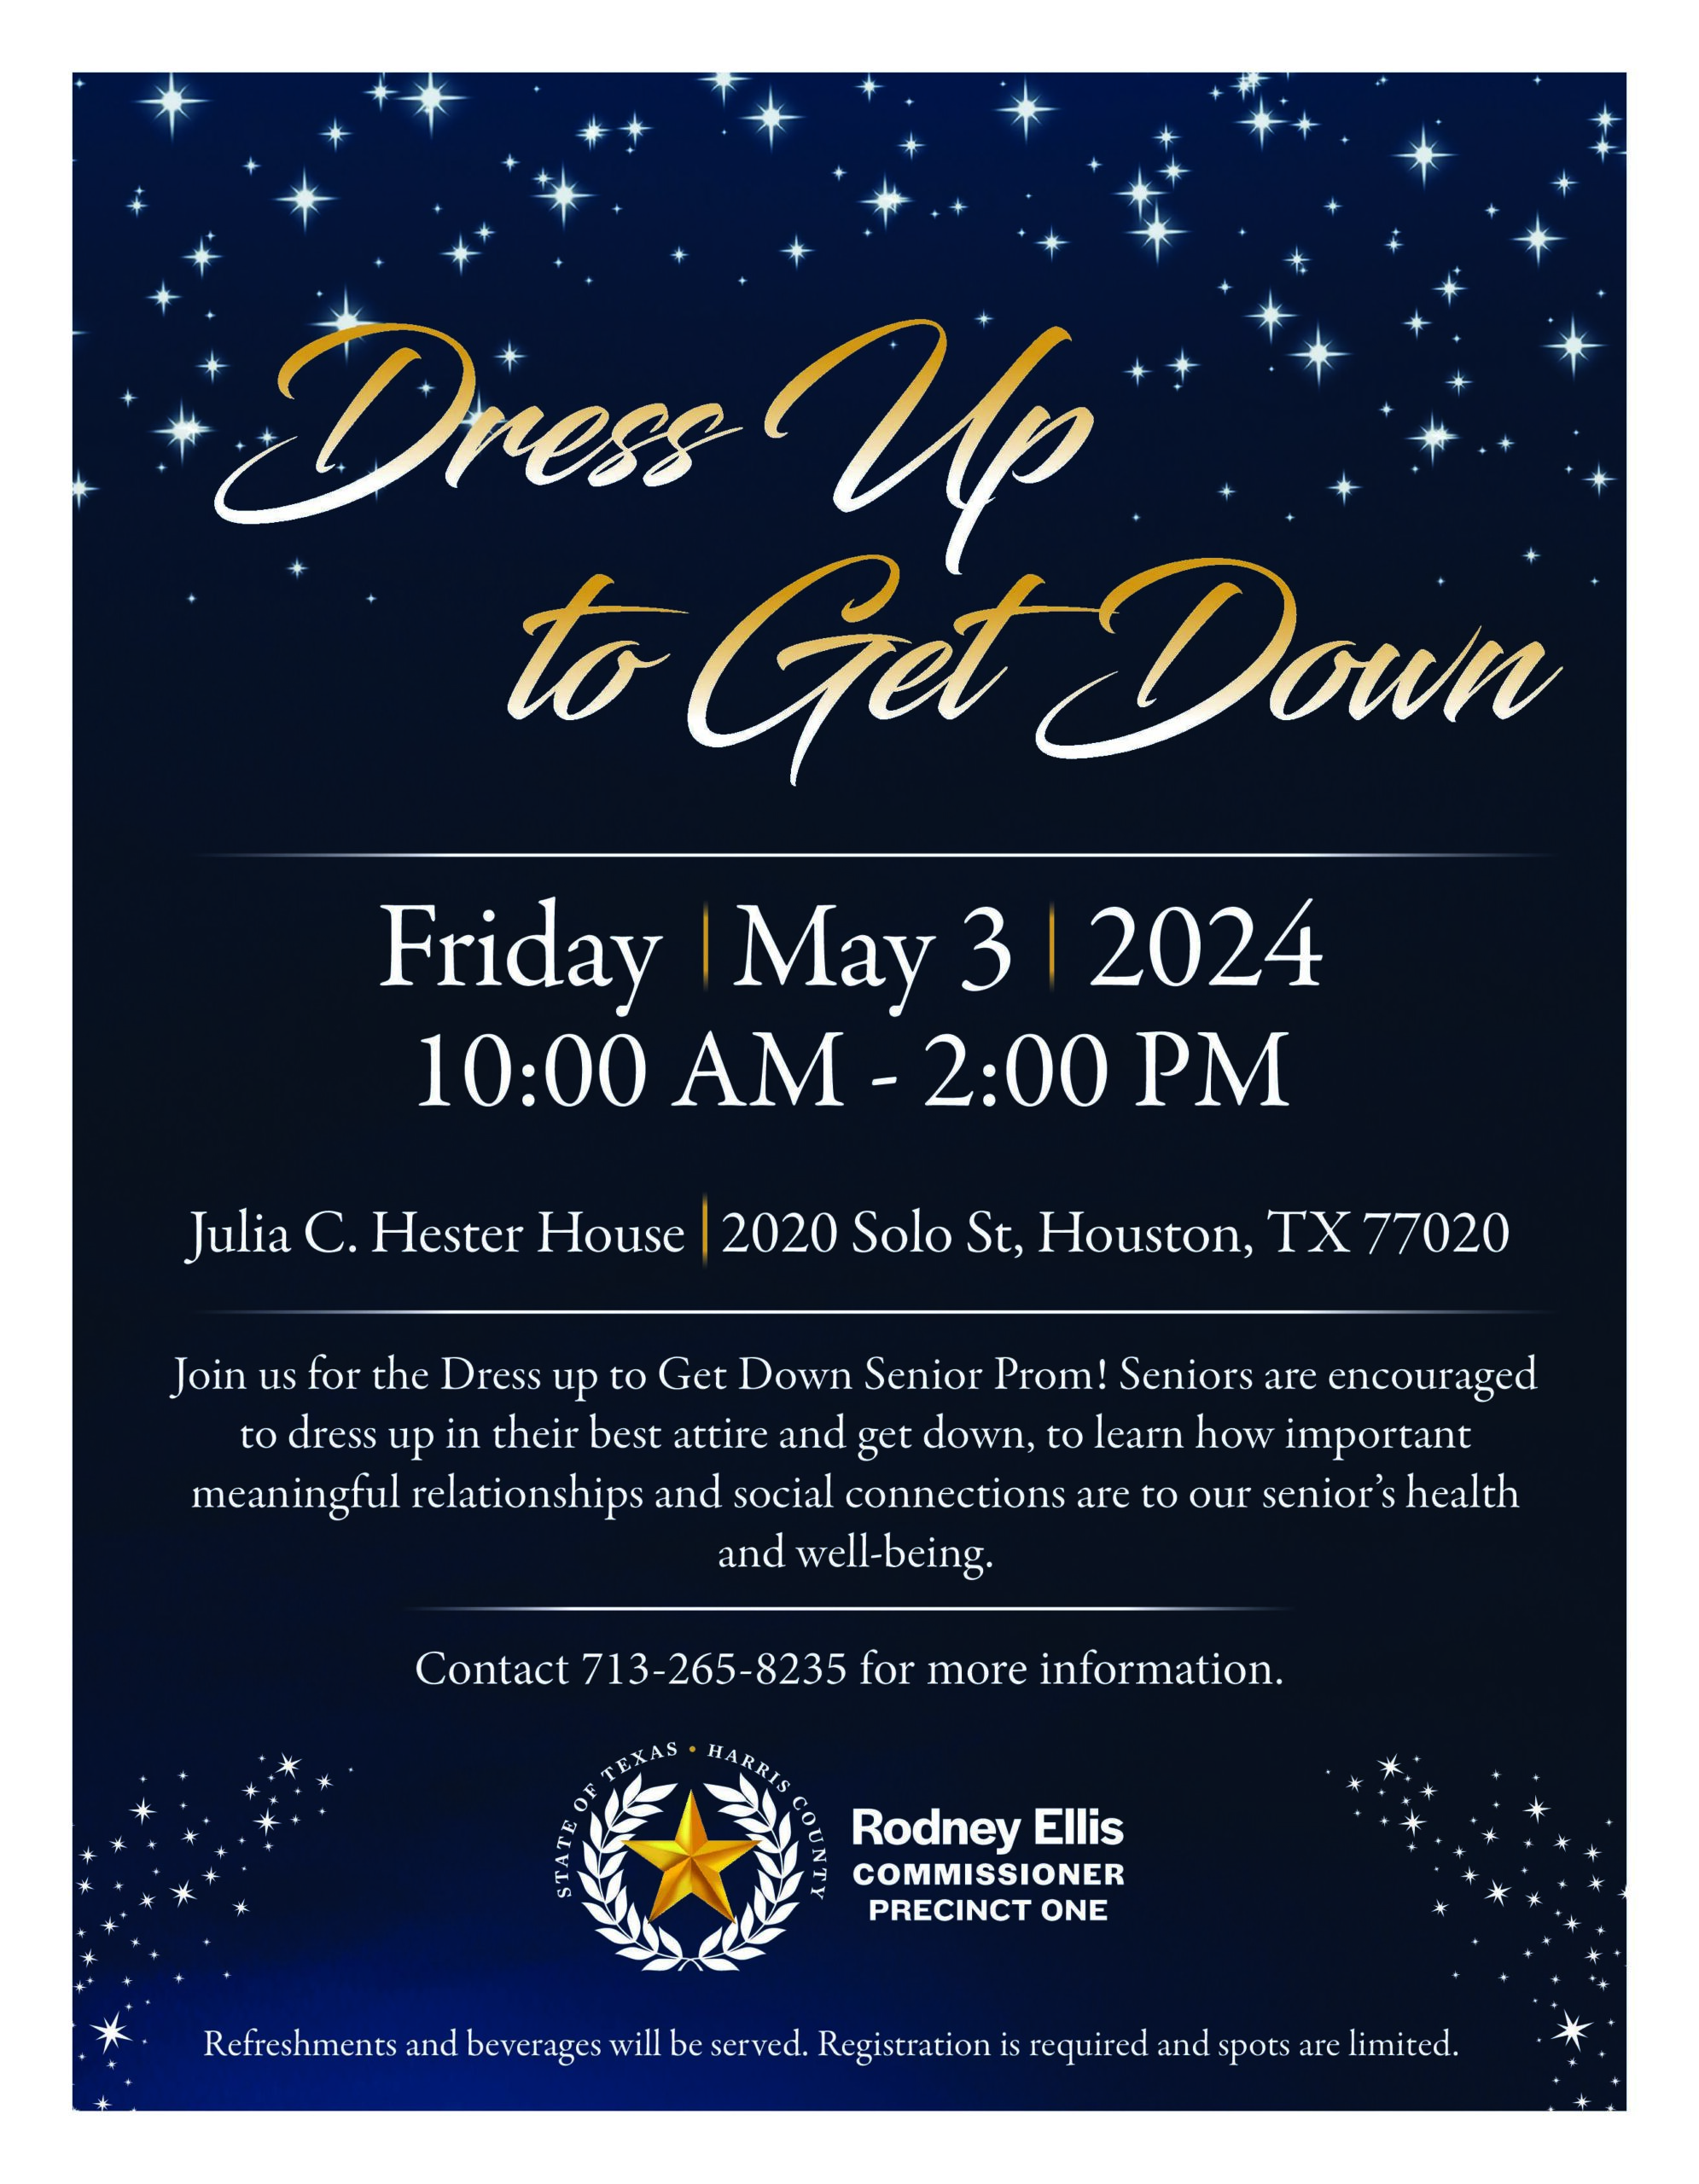 Dress Up to Get Down Senior Prom Flyer